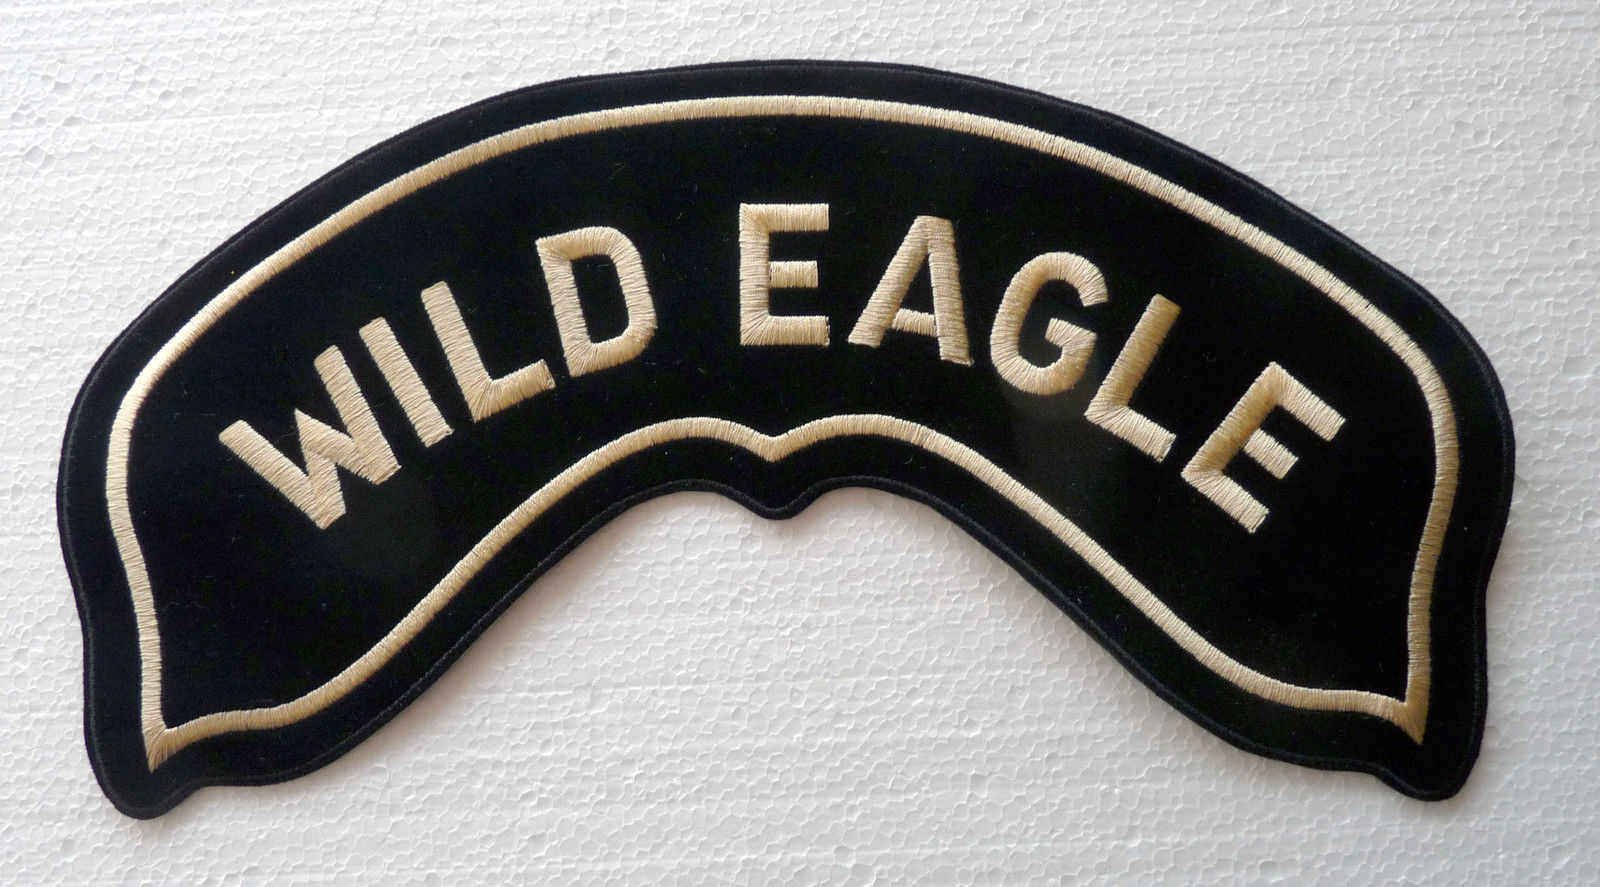 Small Hog Eagle Rocker Patch, personalized with your name